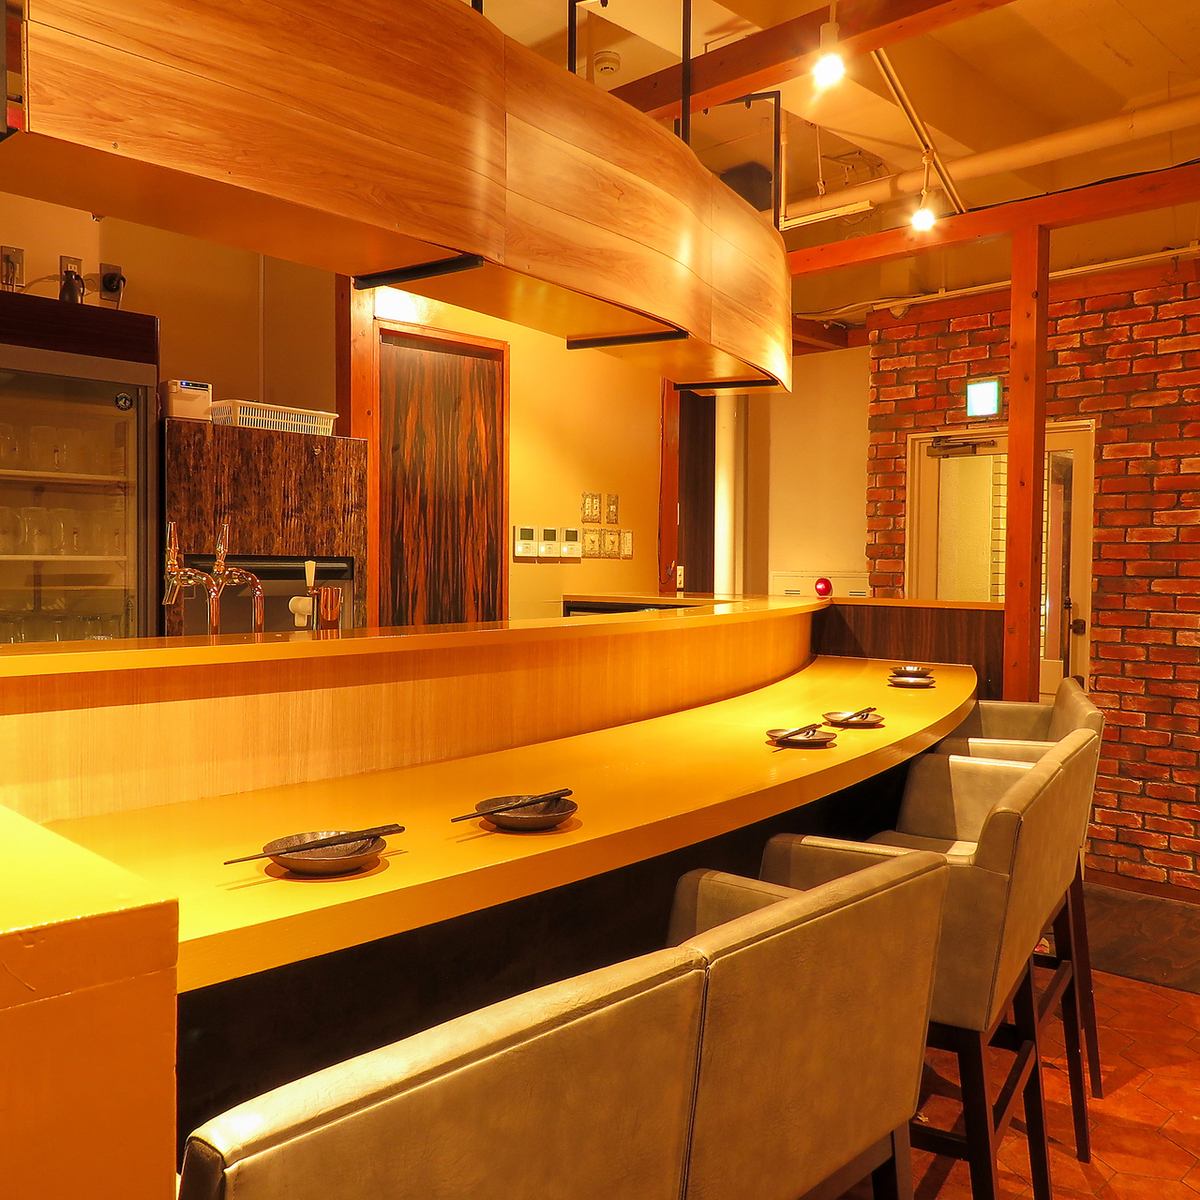 The counter seats where you can relax together are recommended for dates etc. ♪